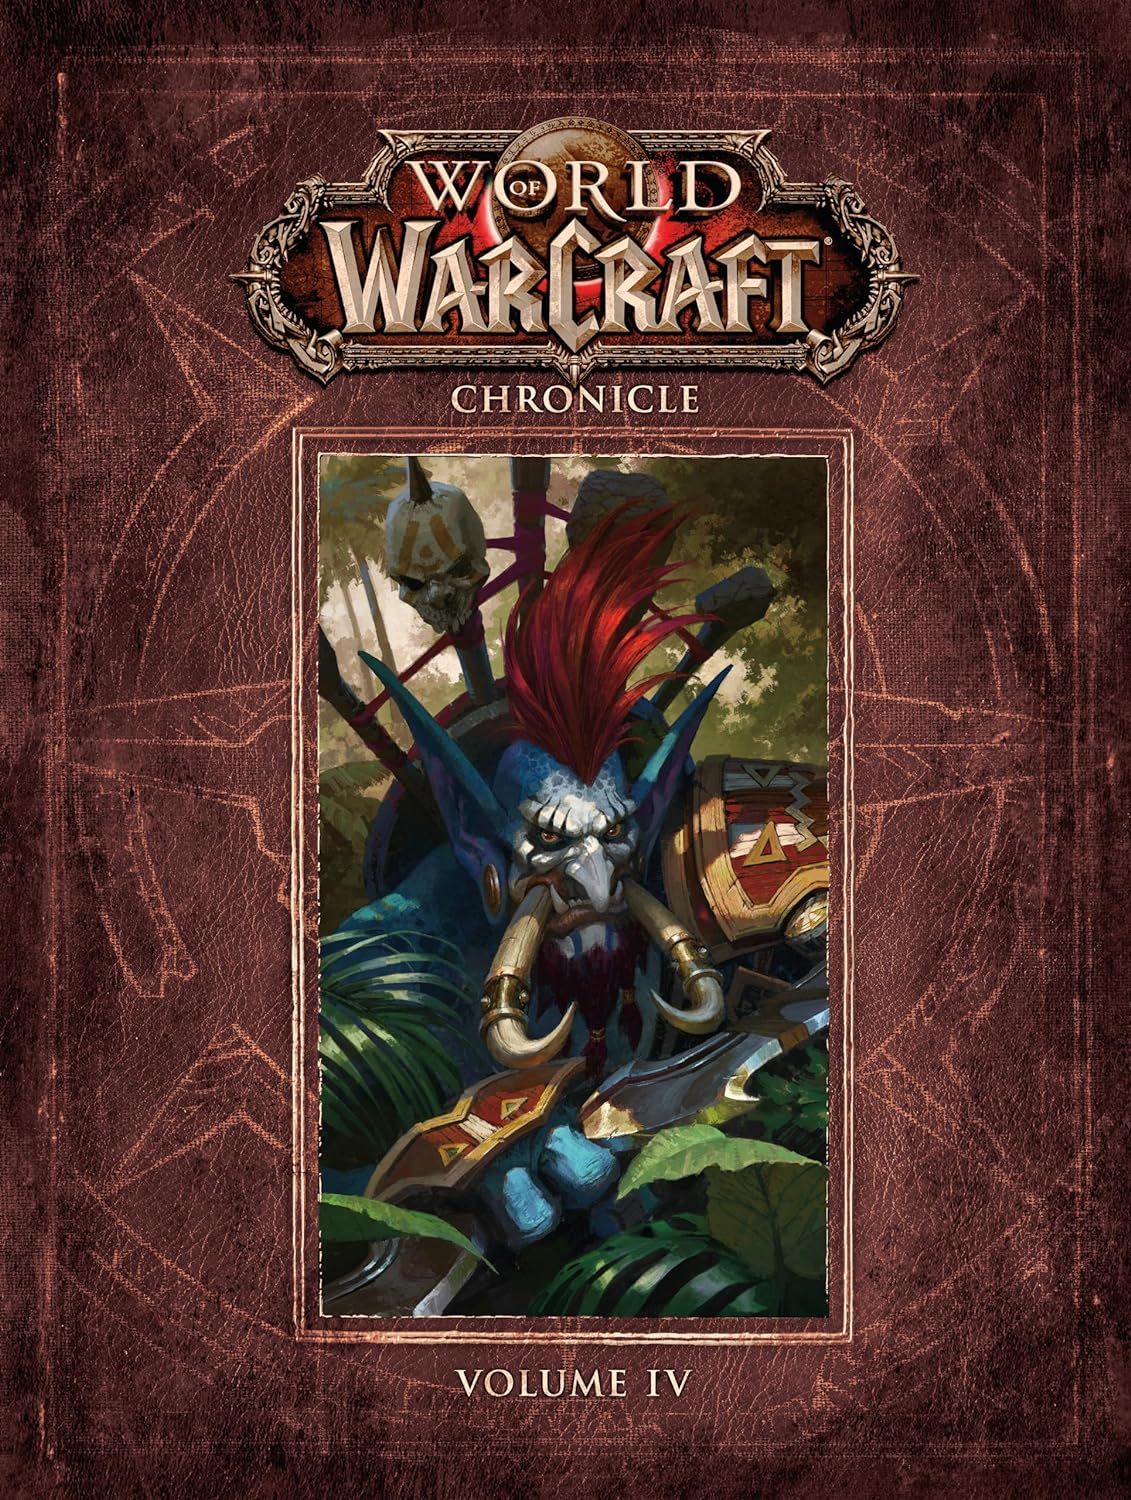 vol’jin on the cover of chronicle volume 4